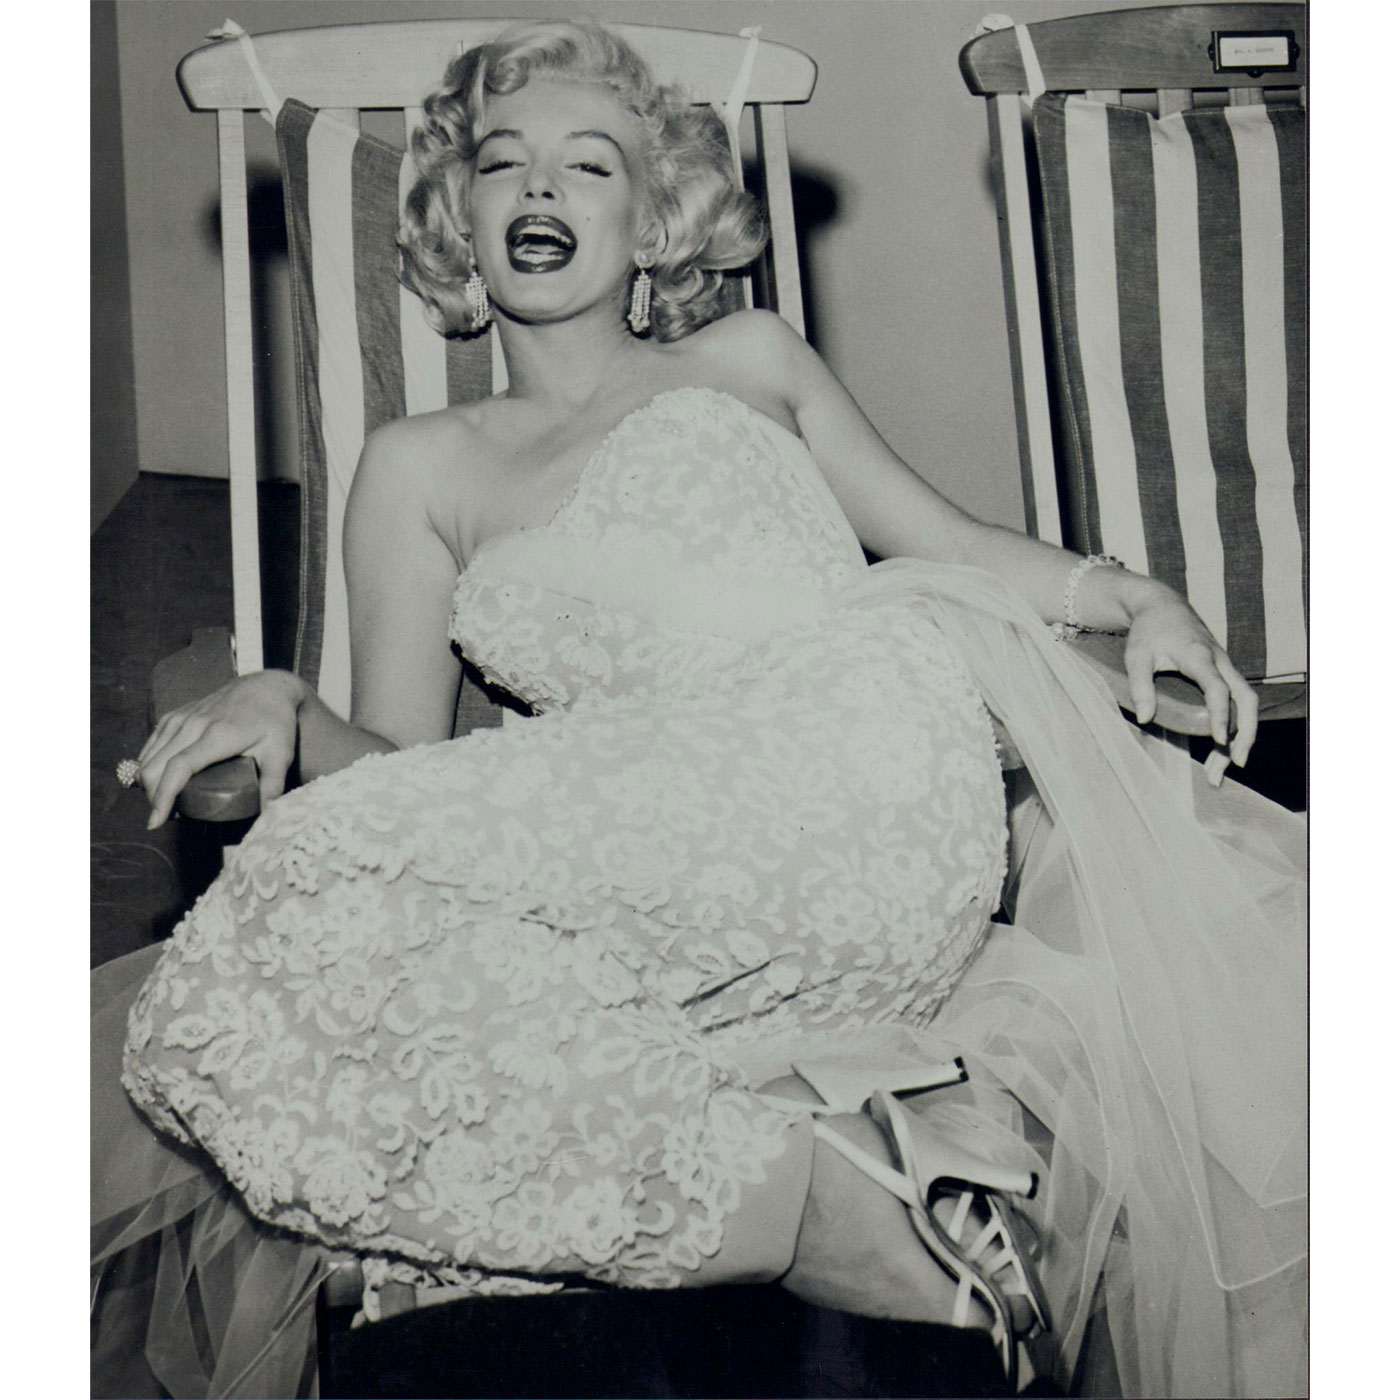 7pc Collection of Photographic Prints, Marilyn Monroe - Image 5 of 6